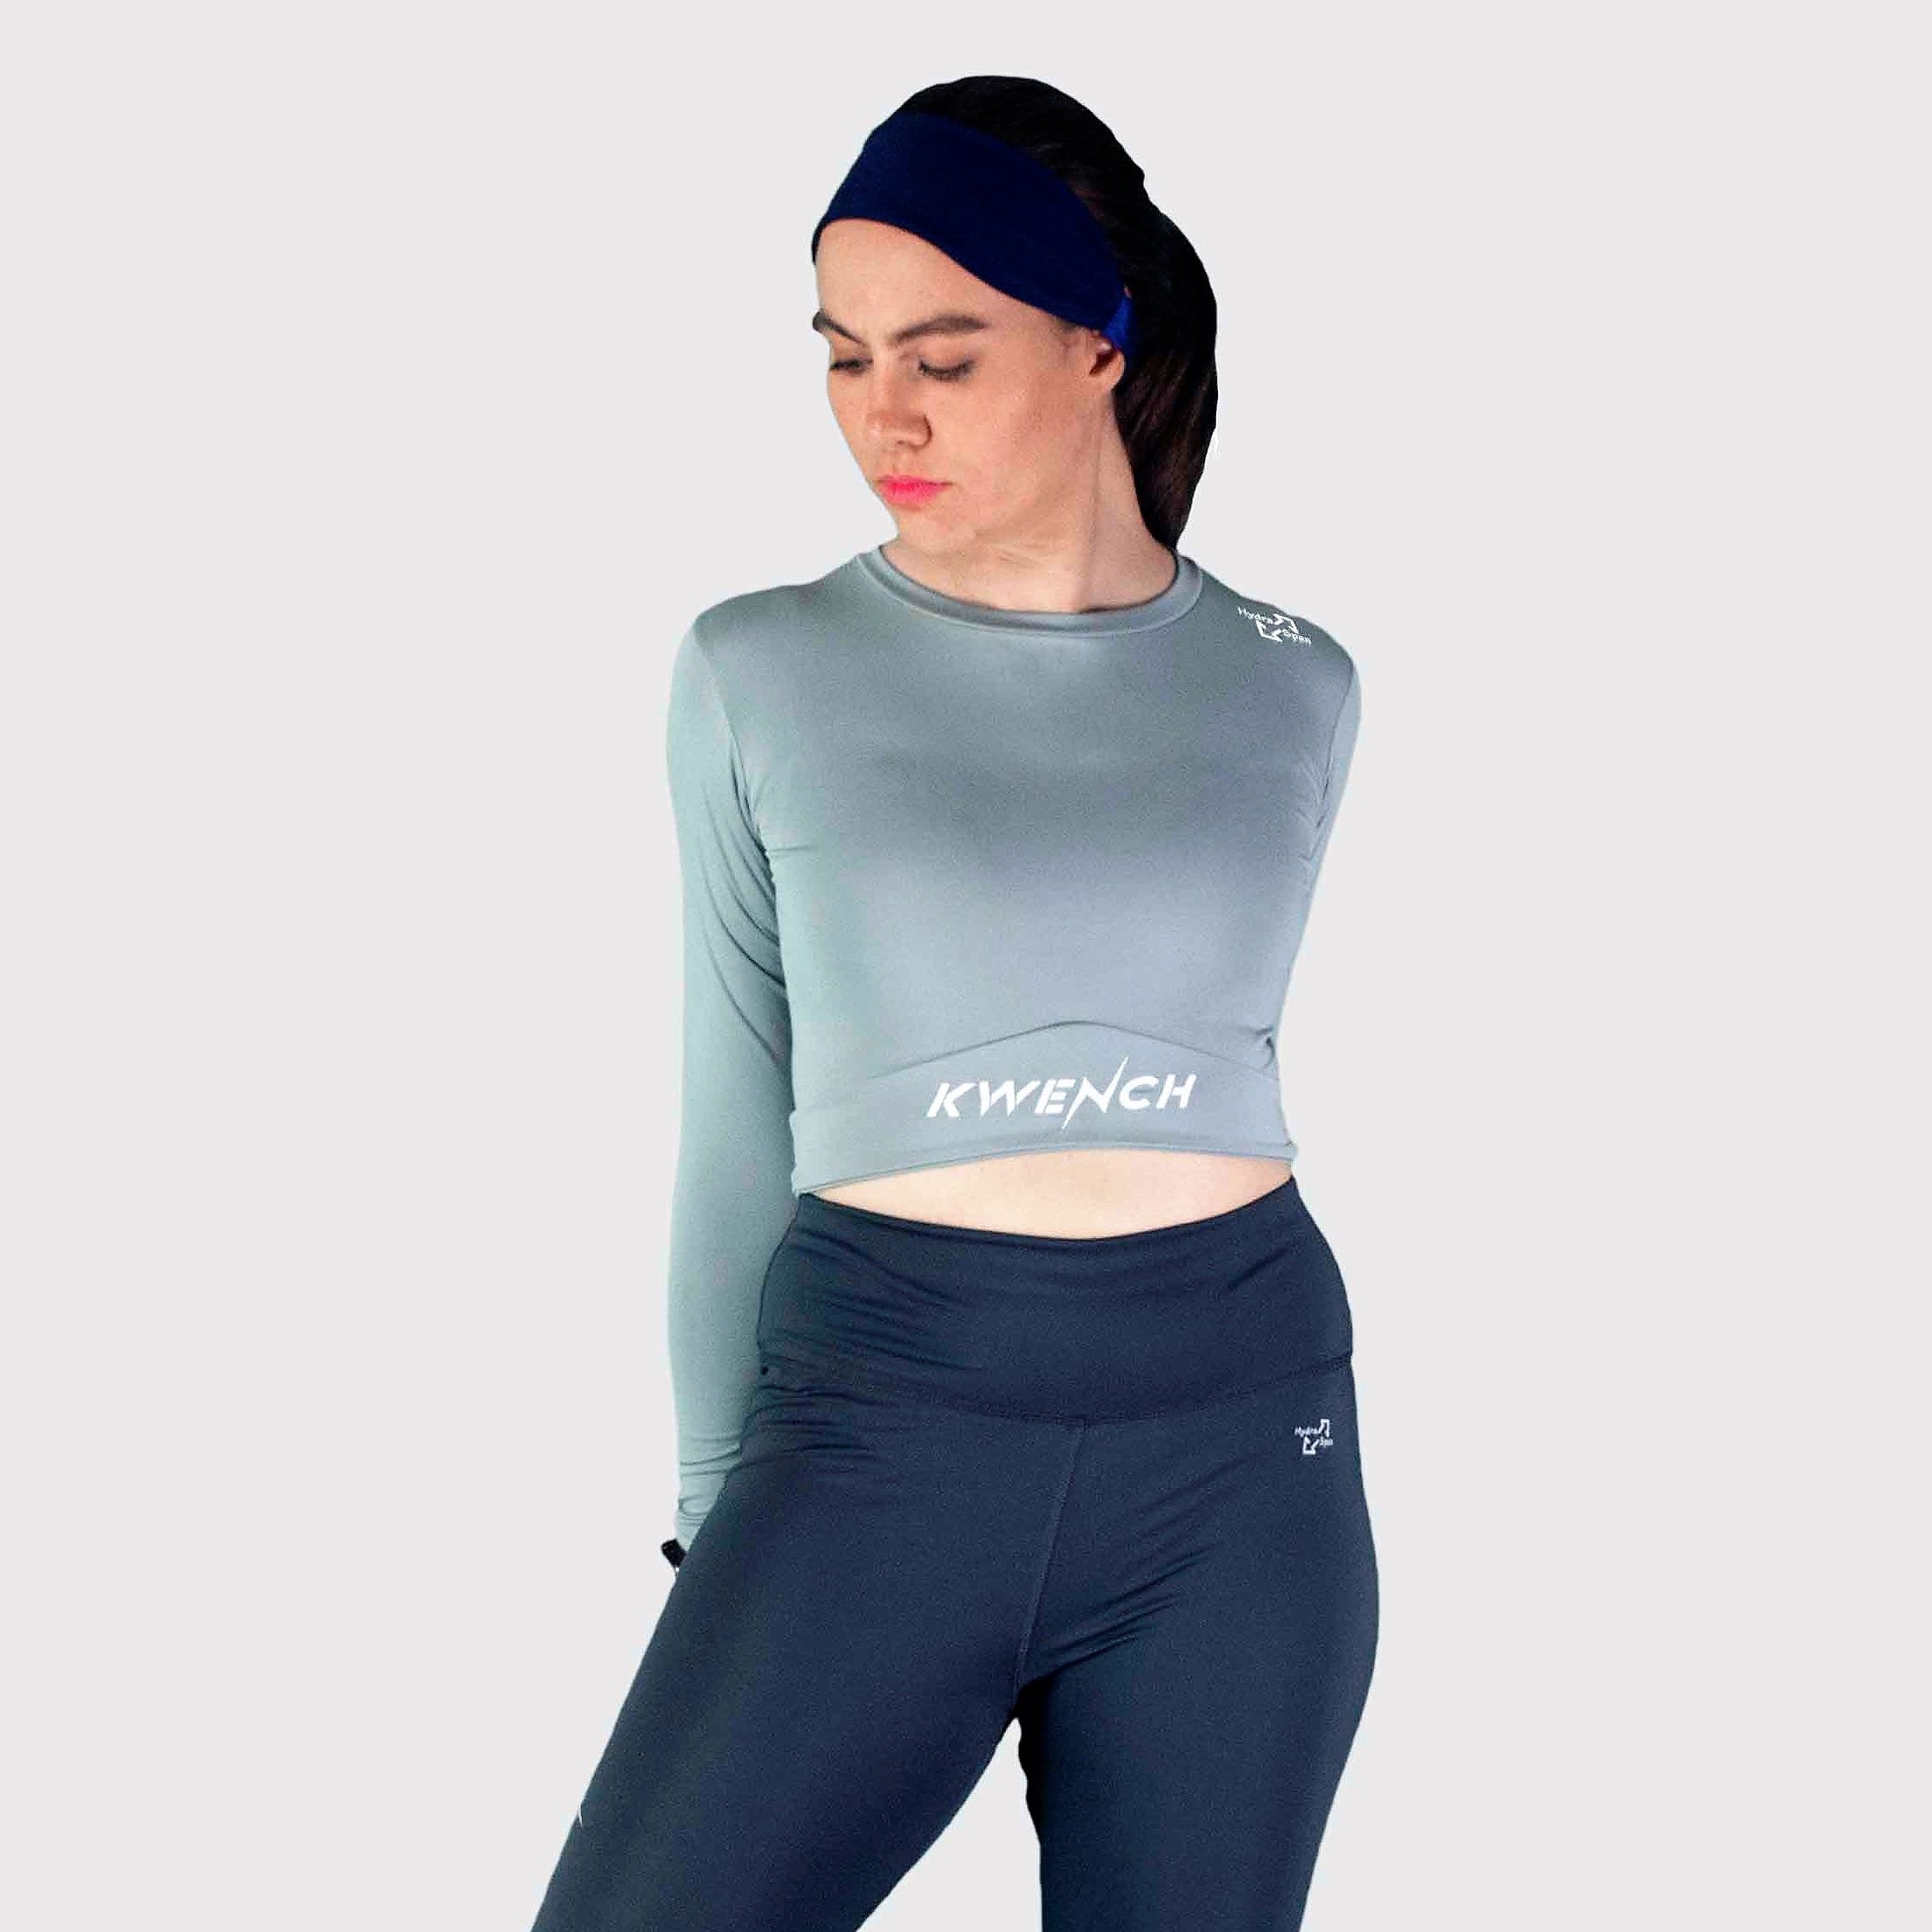 Kwench Womens Full Sleeve Gym workout yoga tshirt crop top 